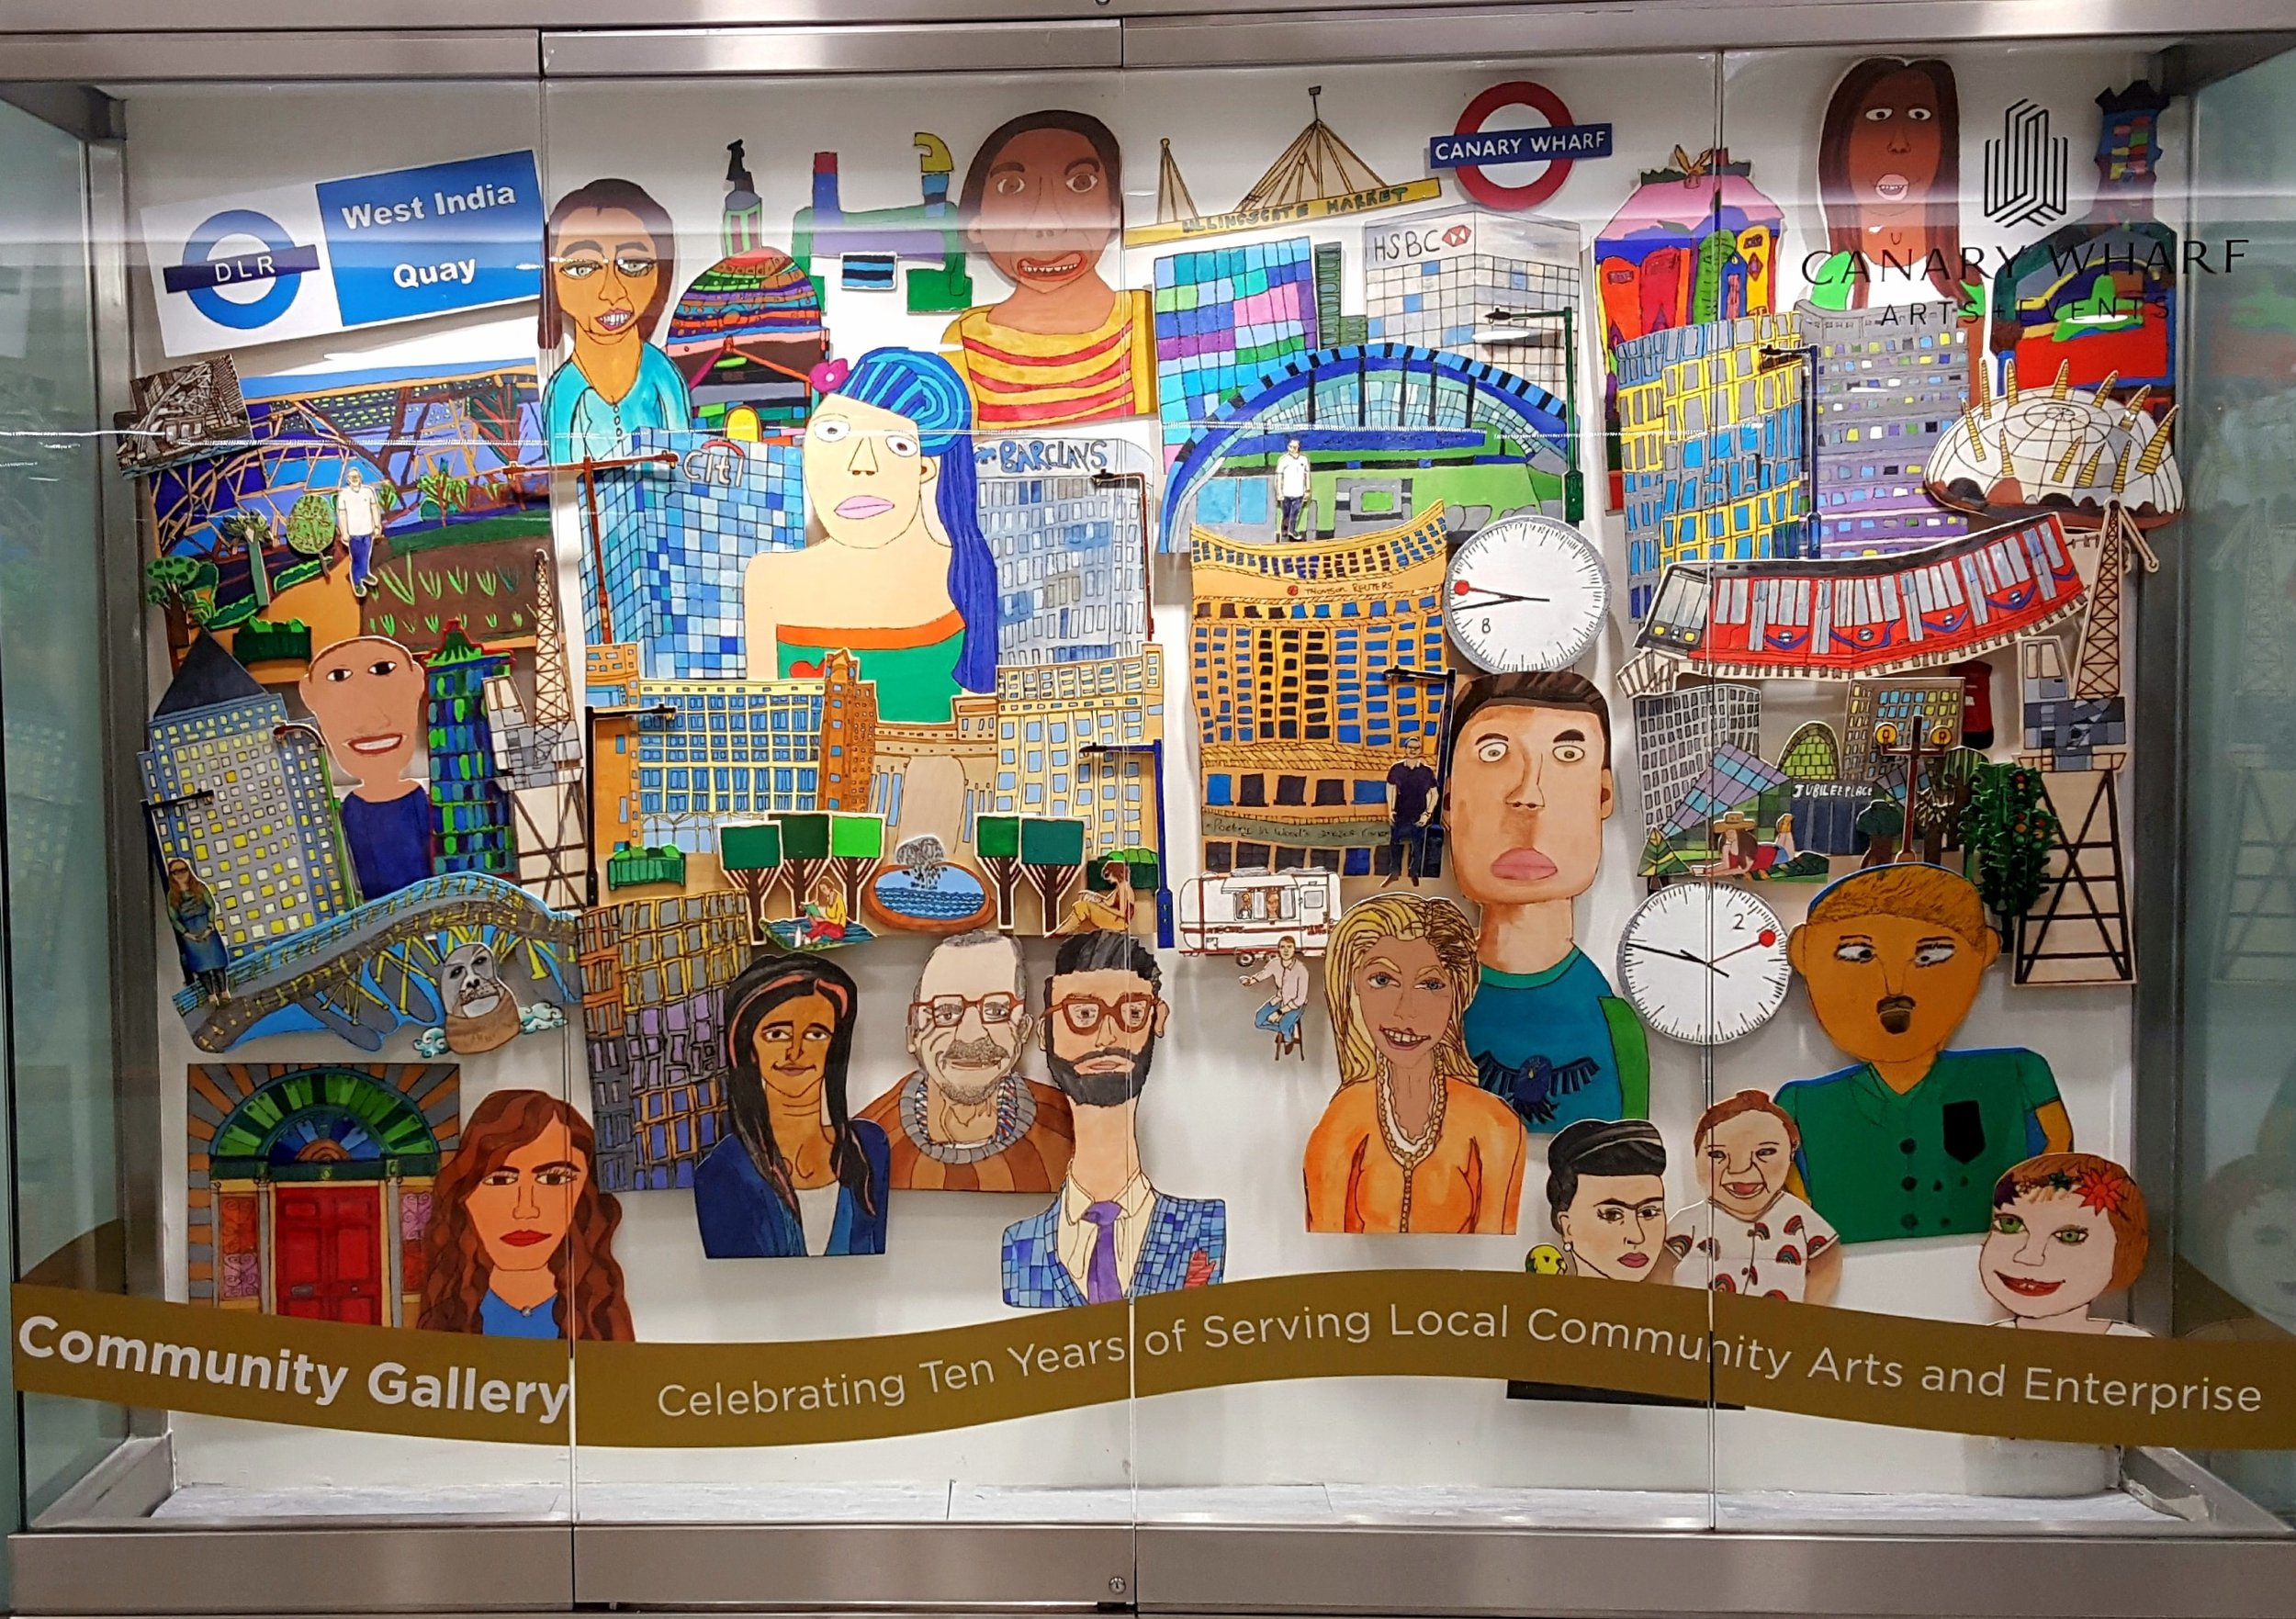   Community Window Exhibition at Canary Wharf, a mural depicting people and the buildings and landmarks of Canary Wharf. 